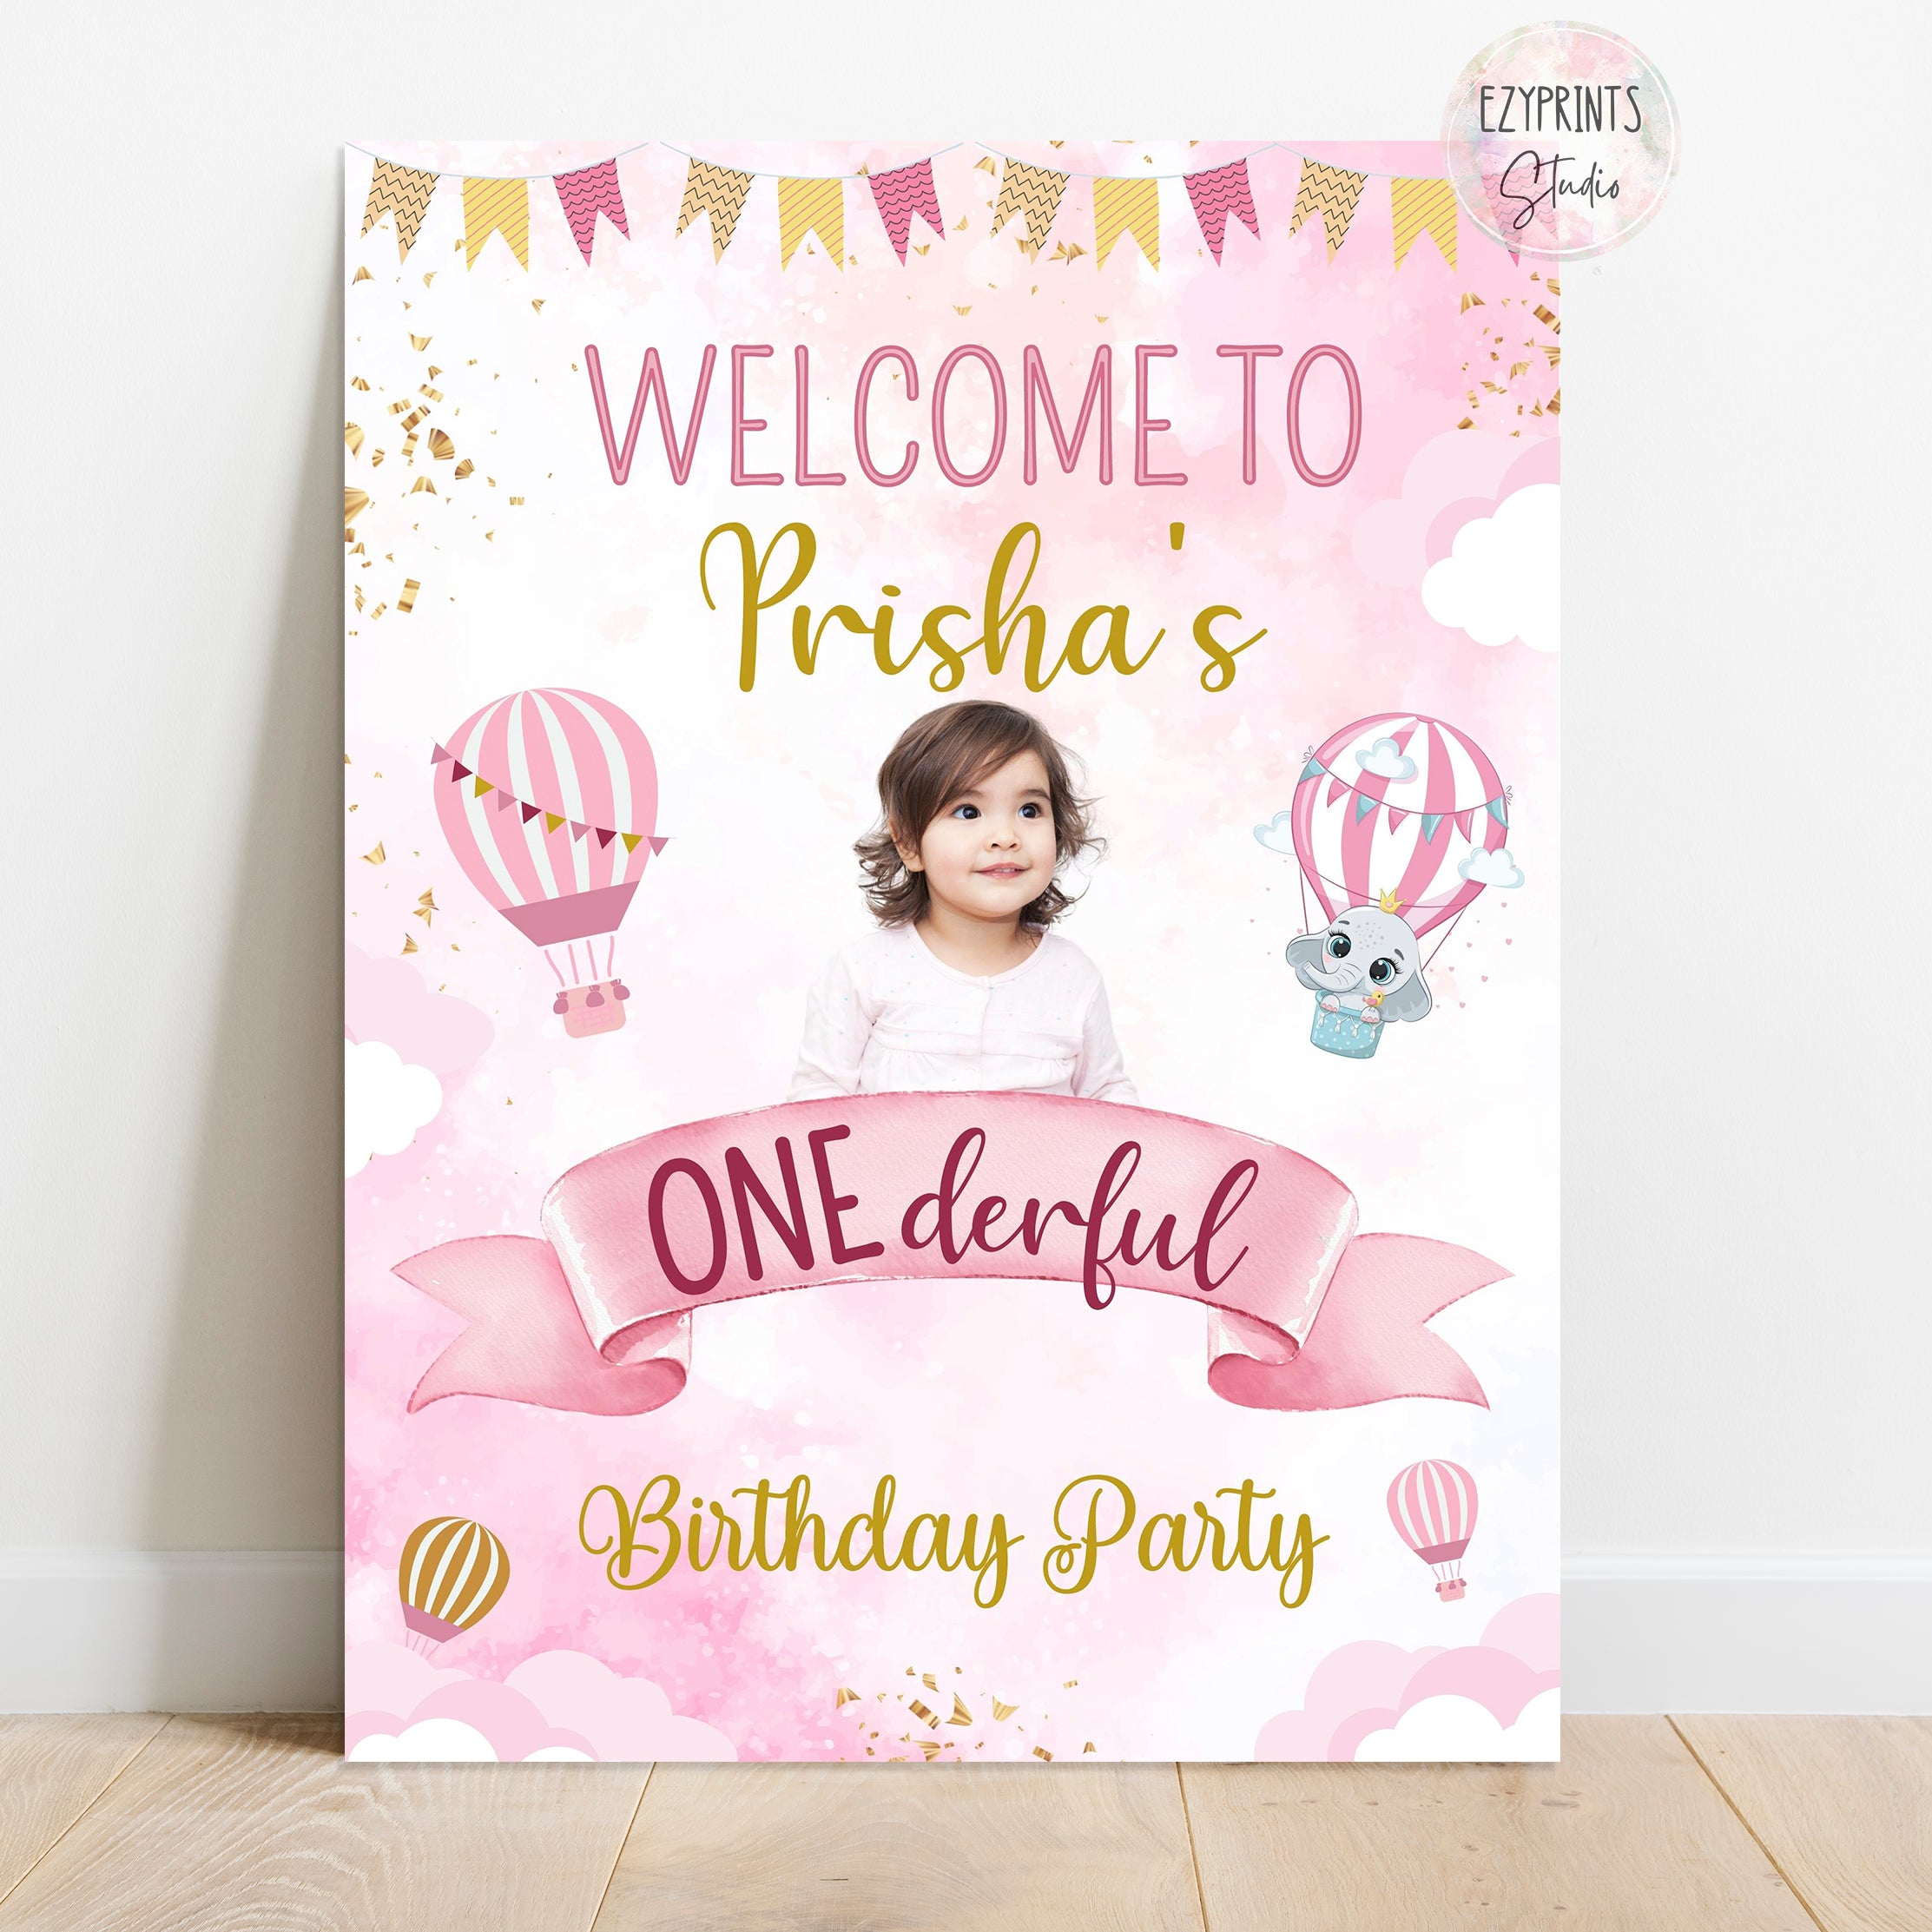 Hot Air Balloon Girls Birthday Party Welcome Board